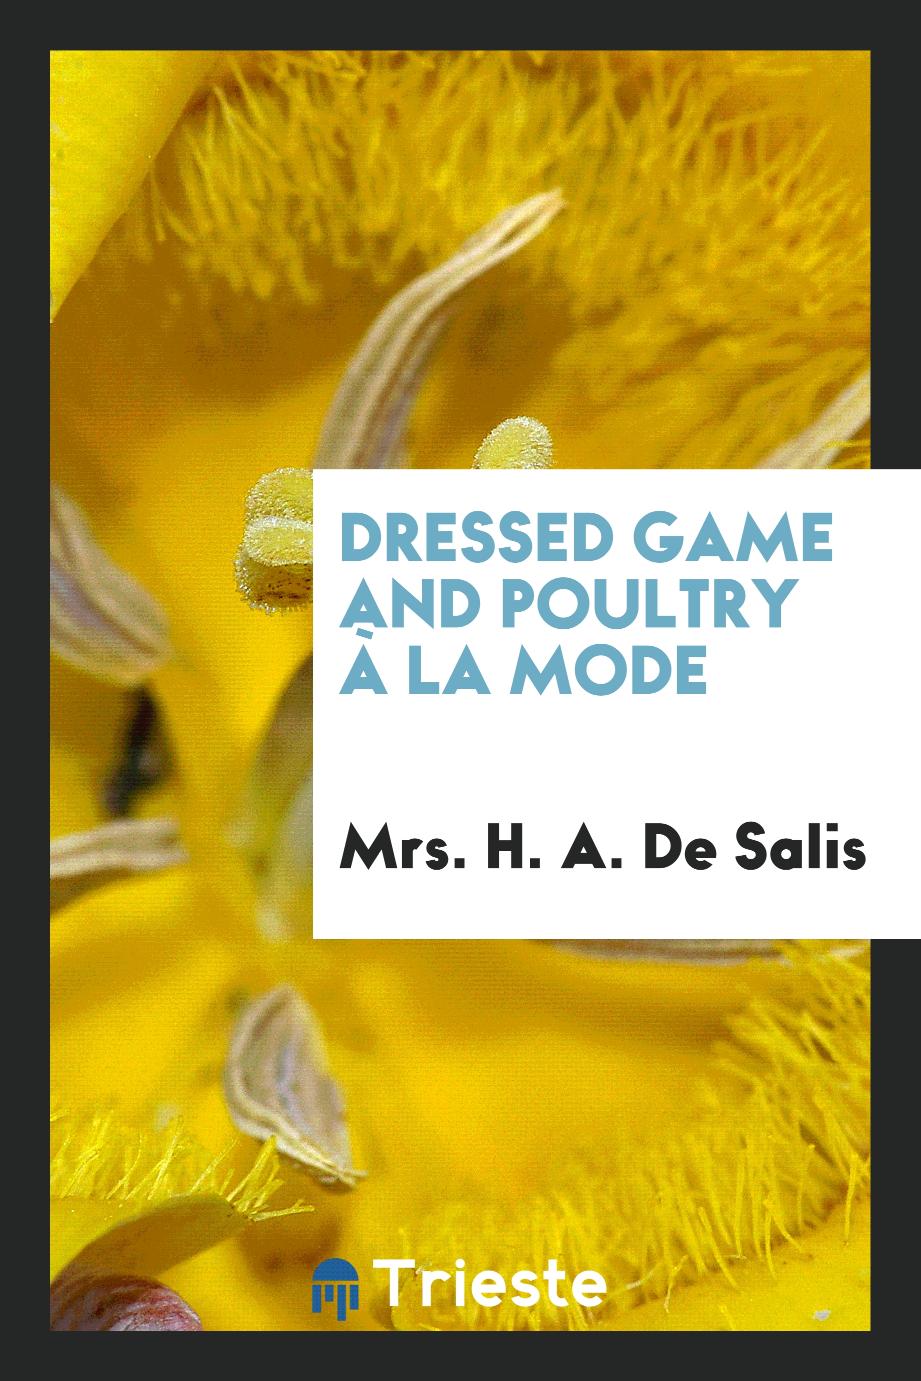 Dressed Game and Poultry à la Mode